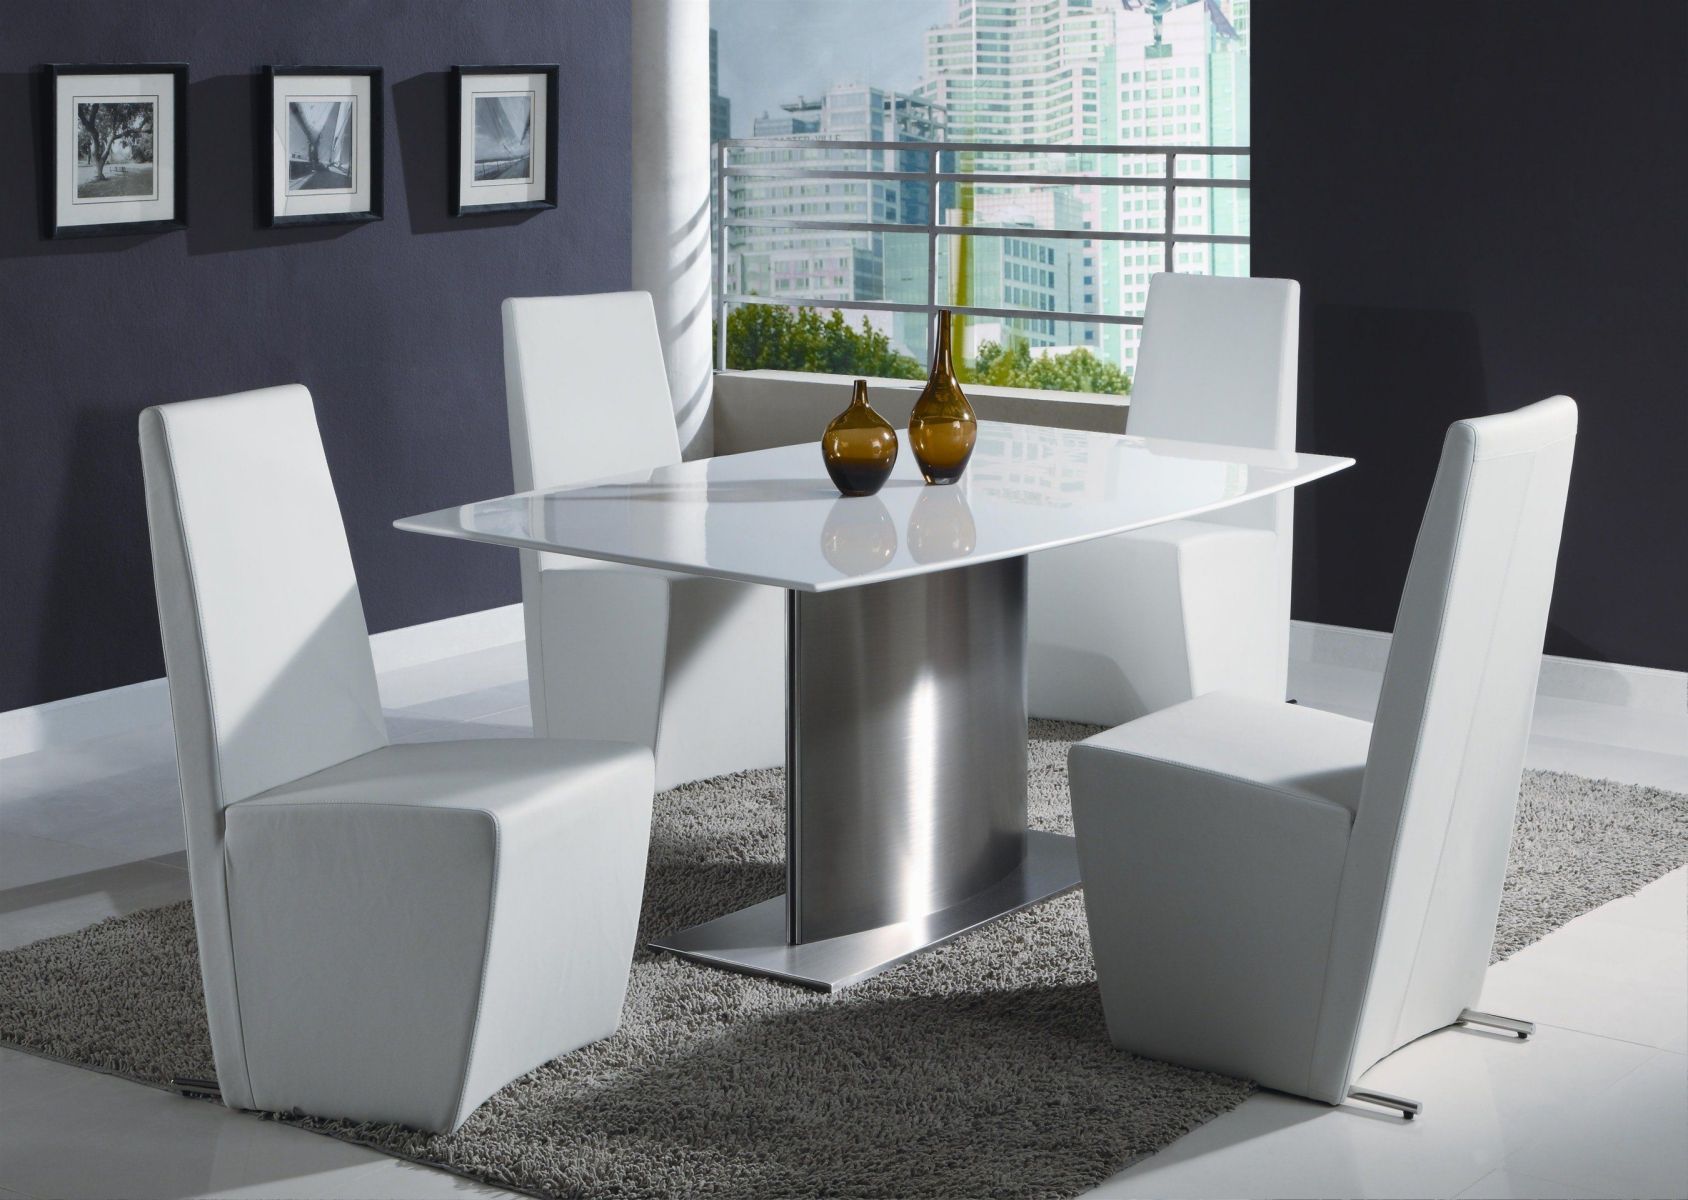 Chintaly Dinette Set  Price Upon RequestCall (631) 742-1351 for Best Price Guarantee Call (631) 742-1351 for Best Price Guarantee